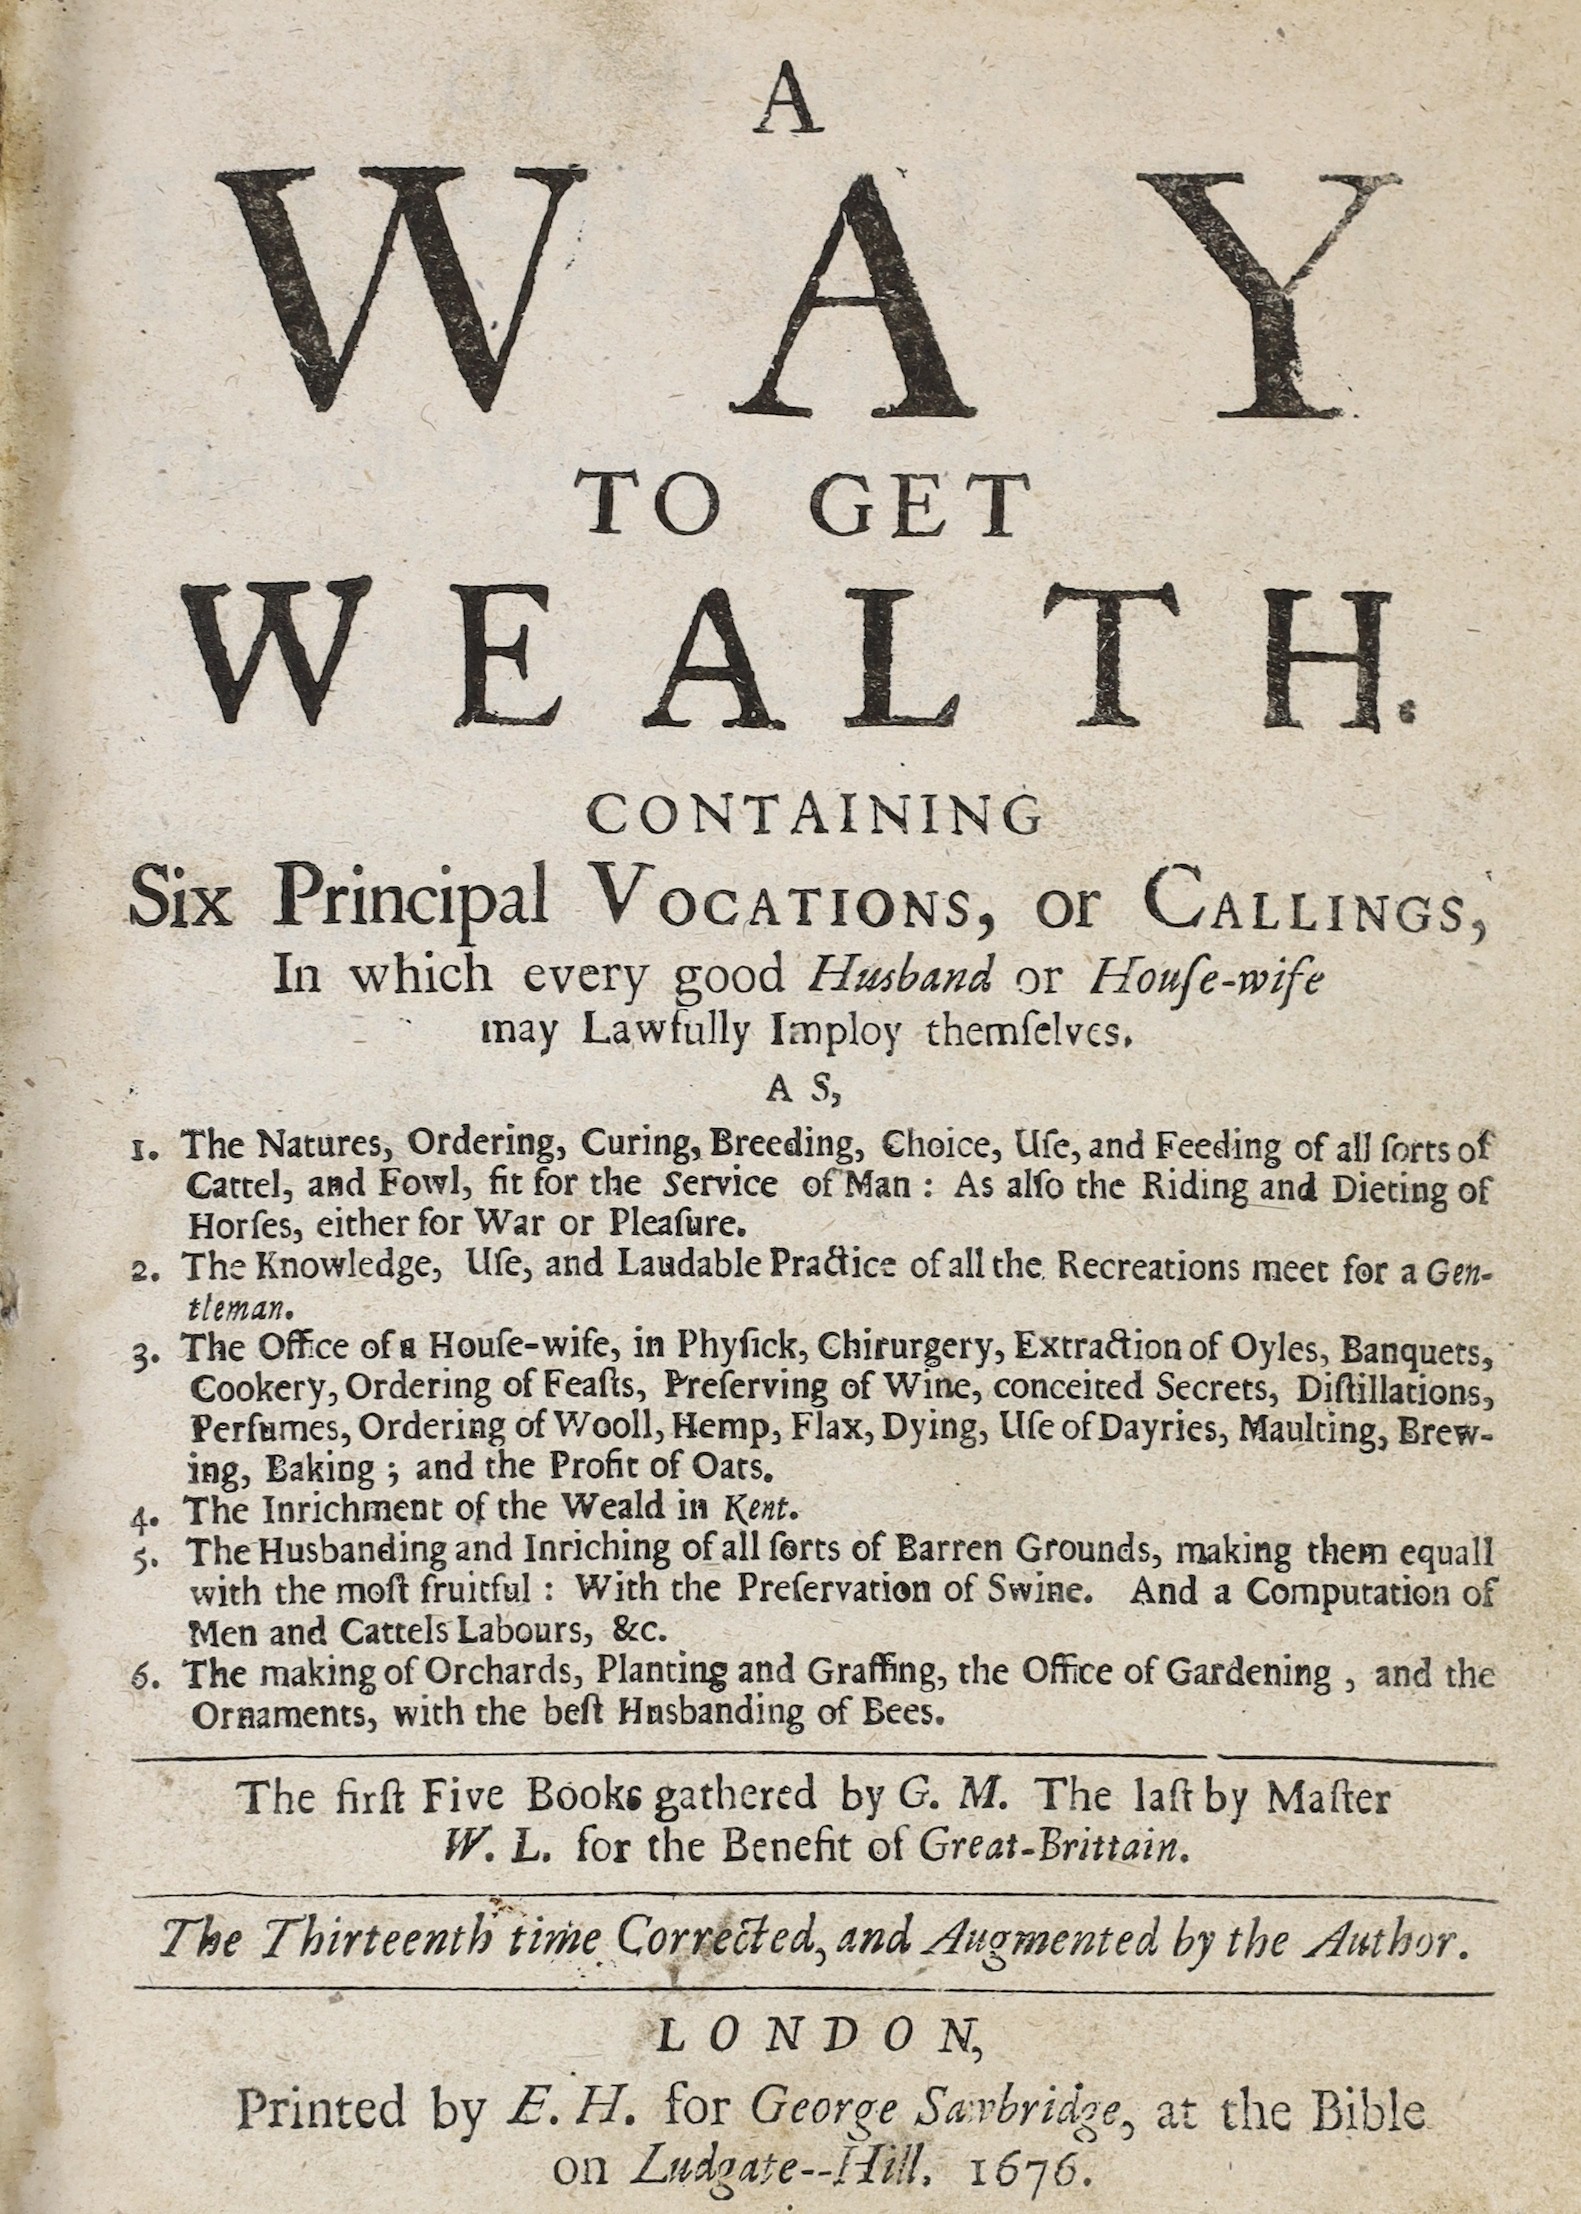 Markham, Gervase, A Way to Get Wealth. Containing Six Principal Vocations, or Callings...the thirteenth time corrected, and augmented by the author. Some engraved text illus. and headpiece decorations; old calf with pane